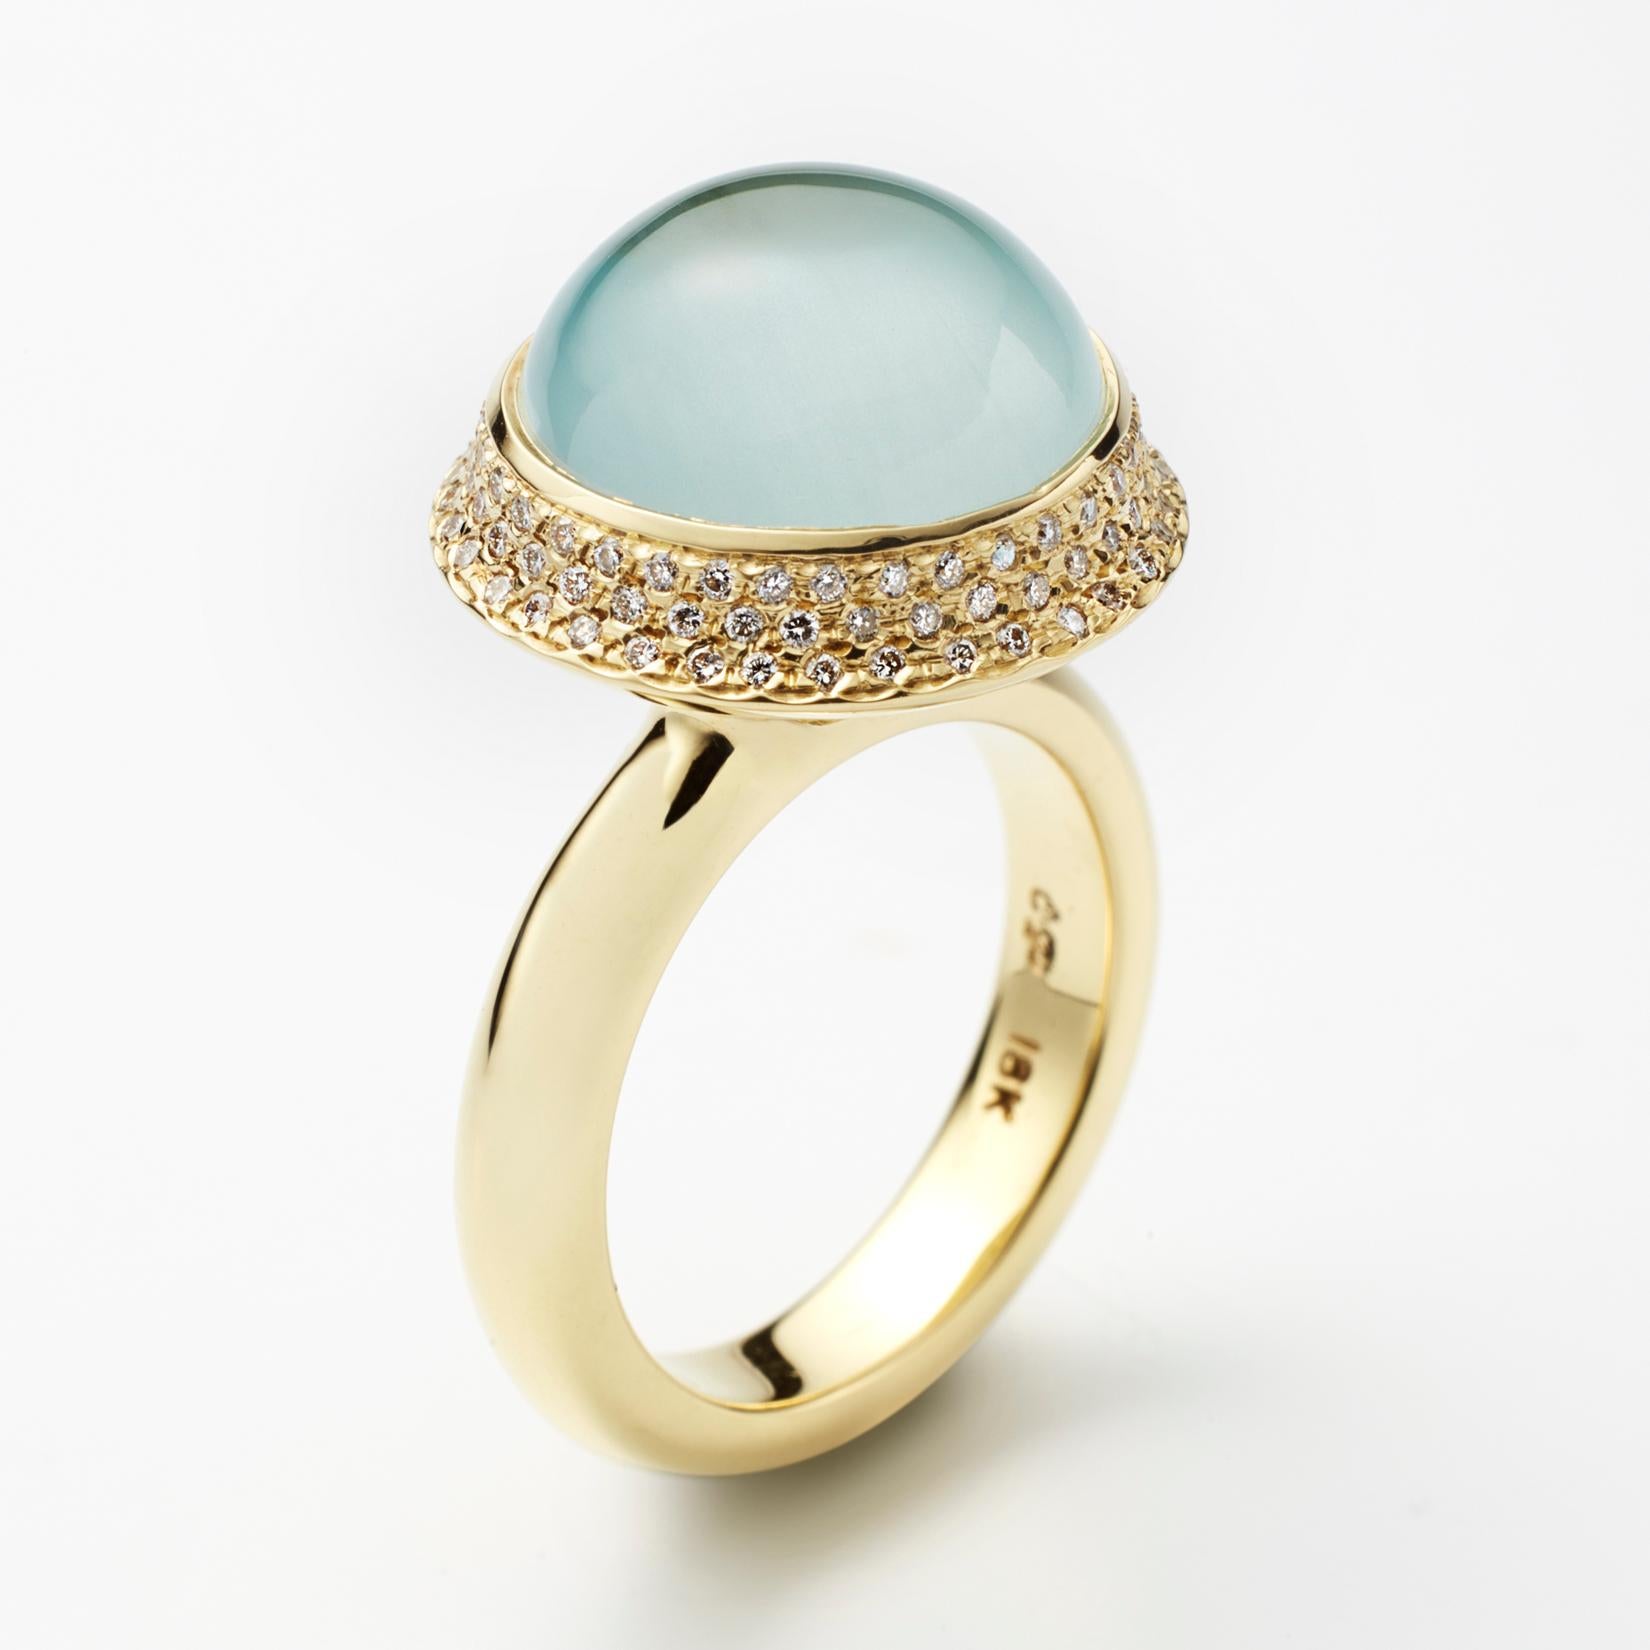 One of a kind large aquamarine cabochon 18K gold ring surrounded with inset pave diamonds, by Christopher Phelan. Ring size 6 1/2, can be sized up to 7 1/2. Top dimensions 18mm. Band width 4.25 mm.